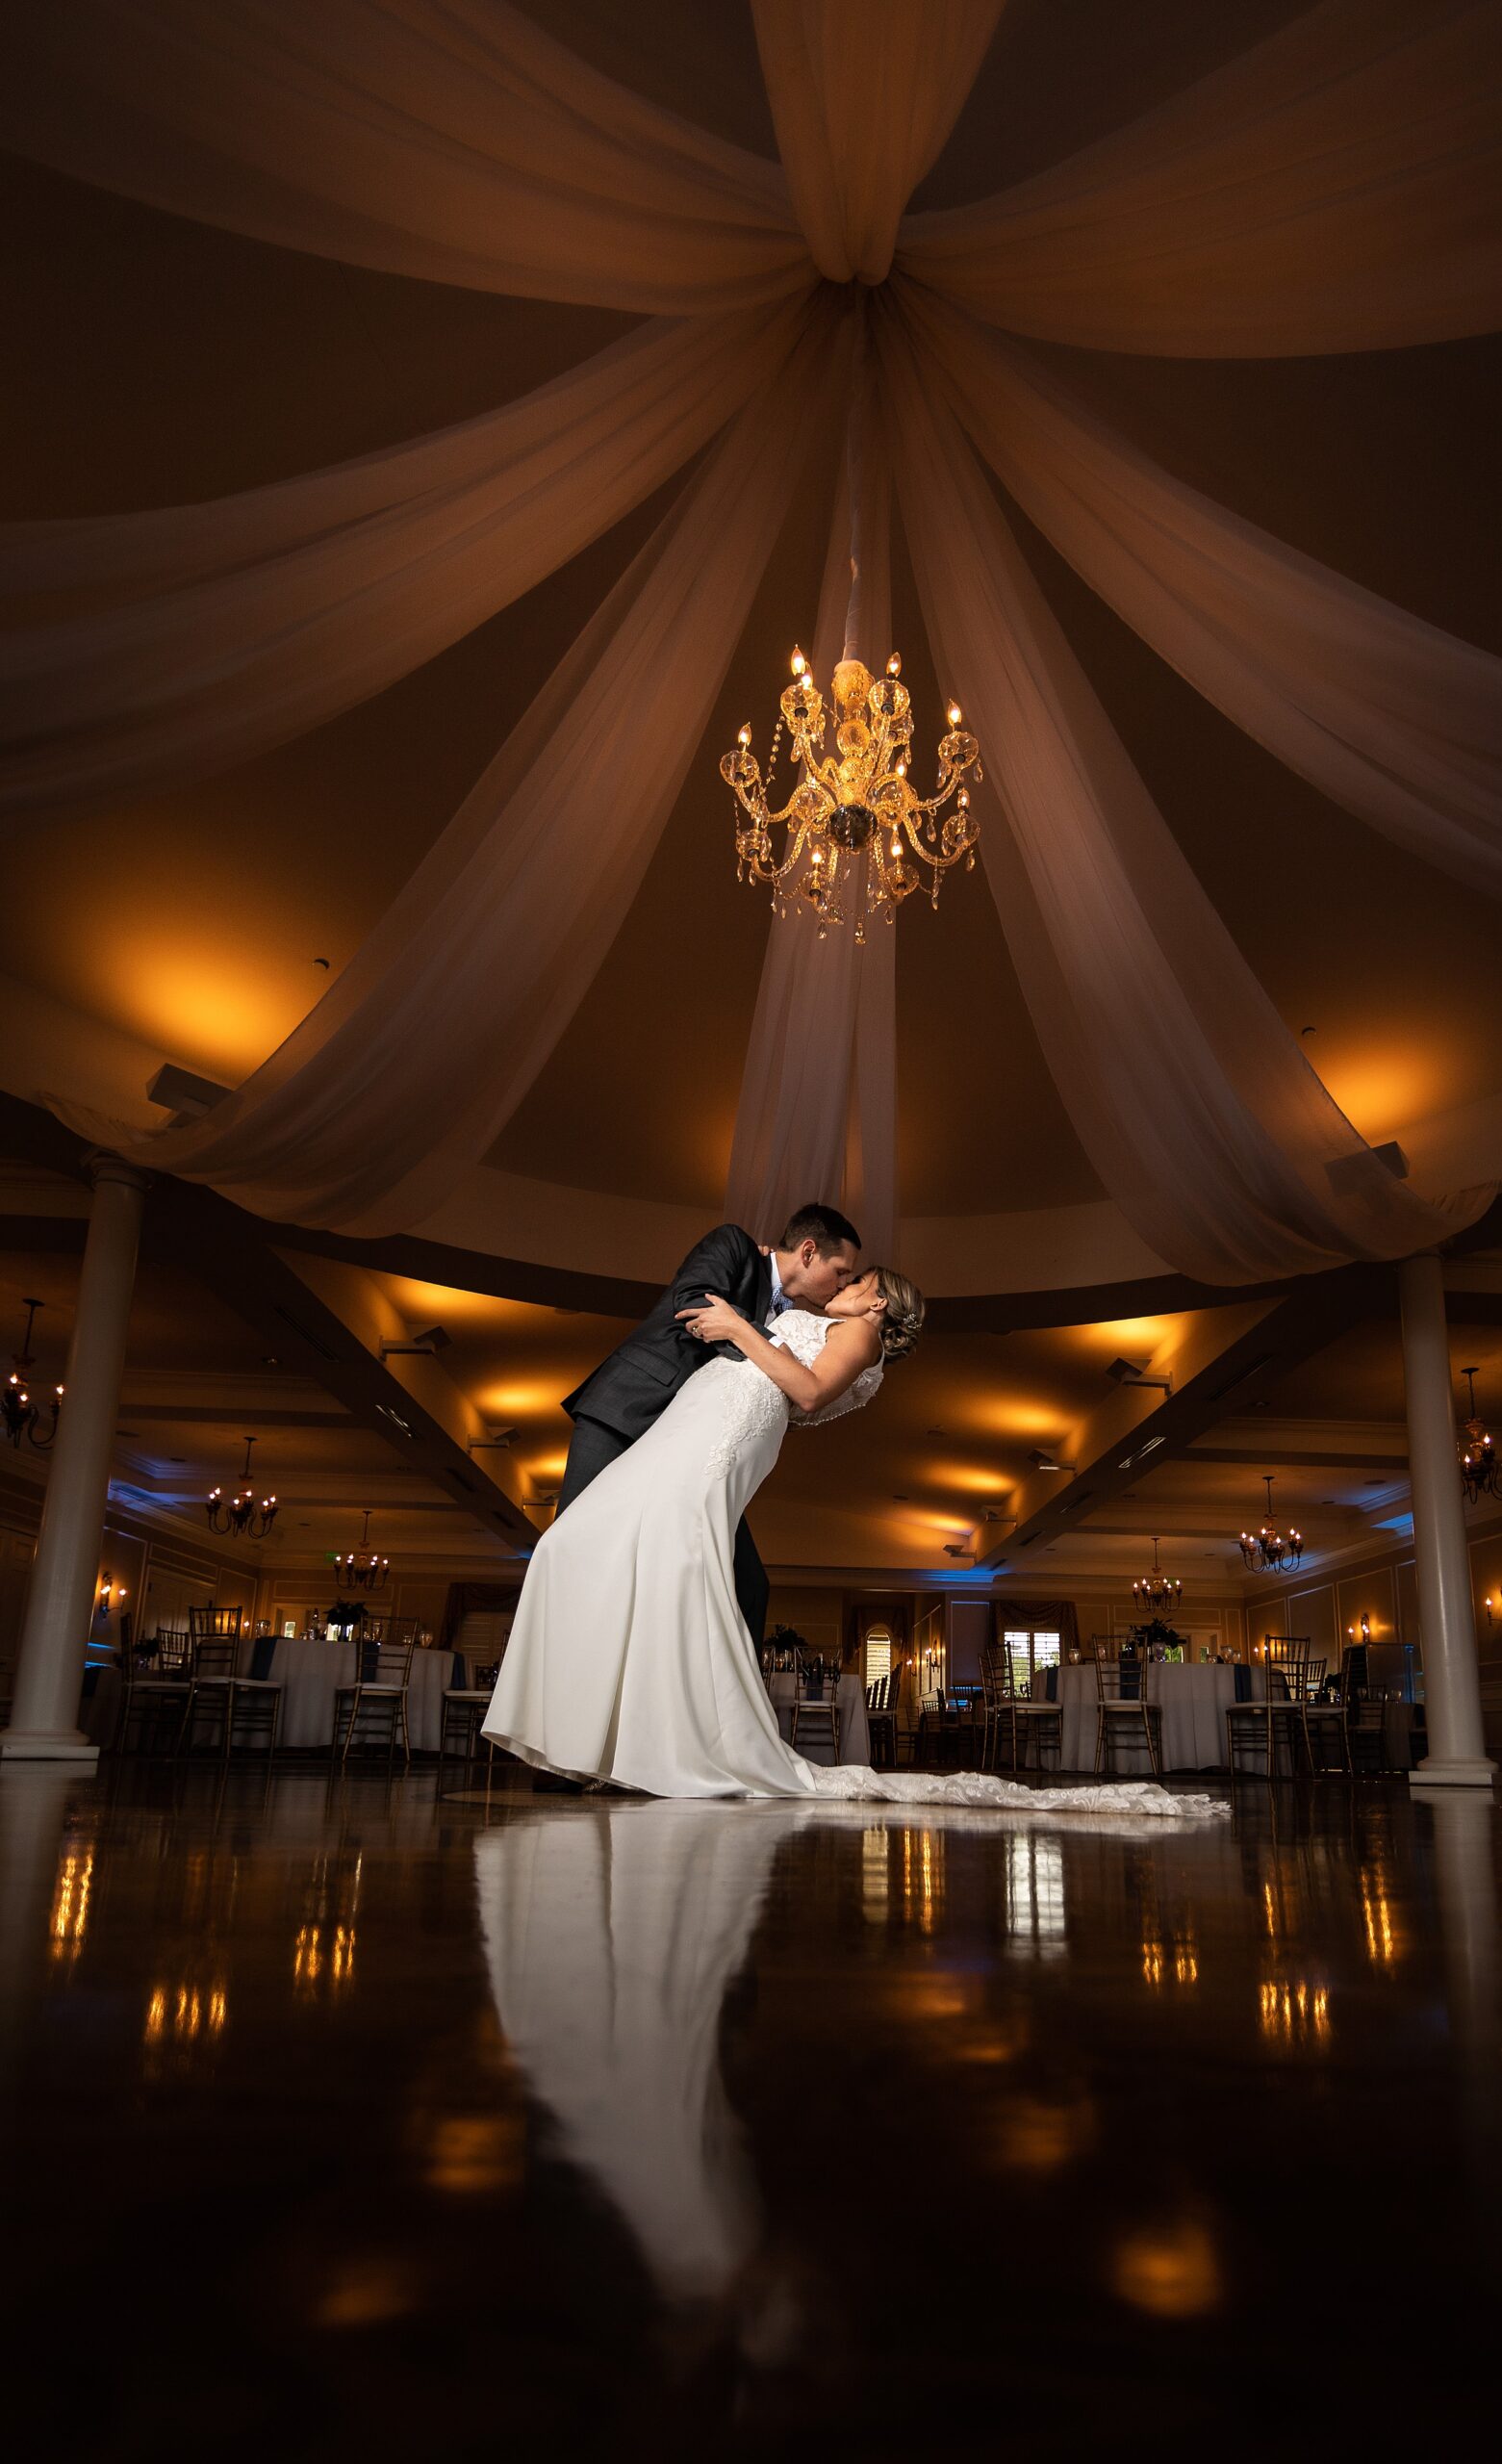 A groom dips and kisses his bride underneath a crystal chandelier in the center of the river house events wedding reception dance floor